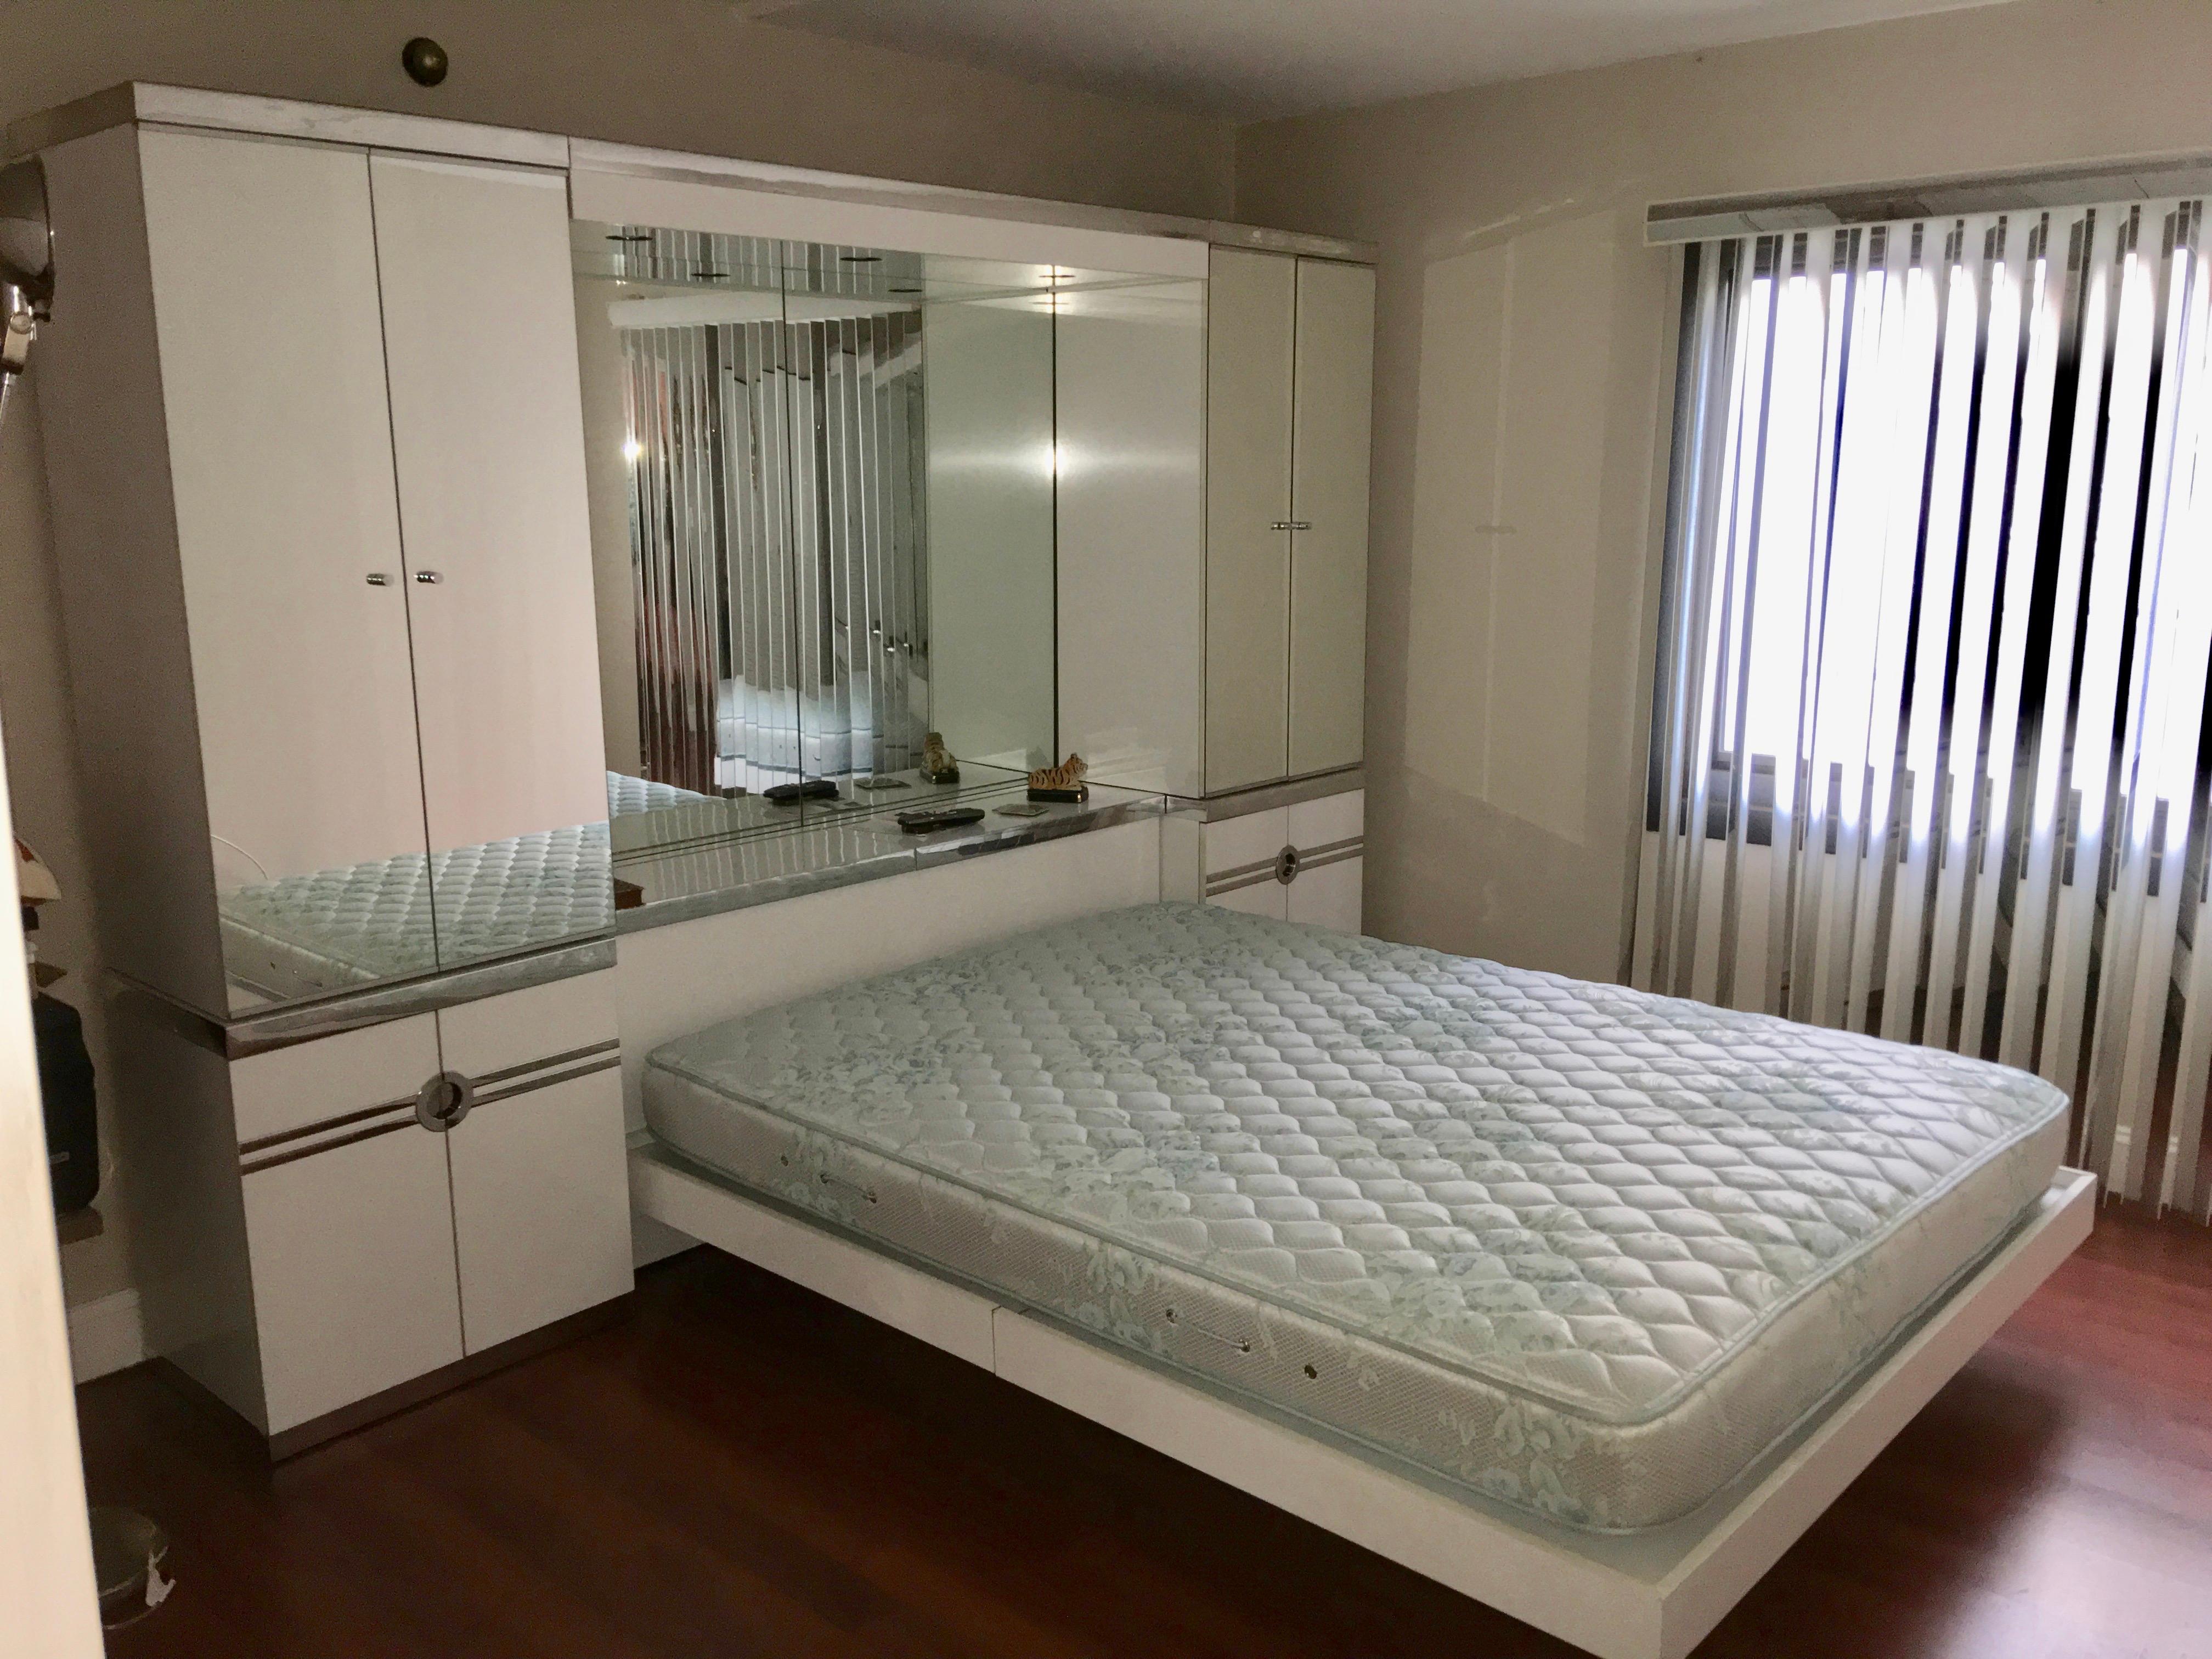 Pierre Cardin queen size platform bed with double wardrobe units, spotlight bridge and headboard cabinet. Presented in white gloss laminate embellished with chrome banding and mirror.

Elements included are the queen size platform bed itself;